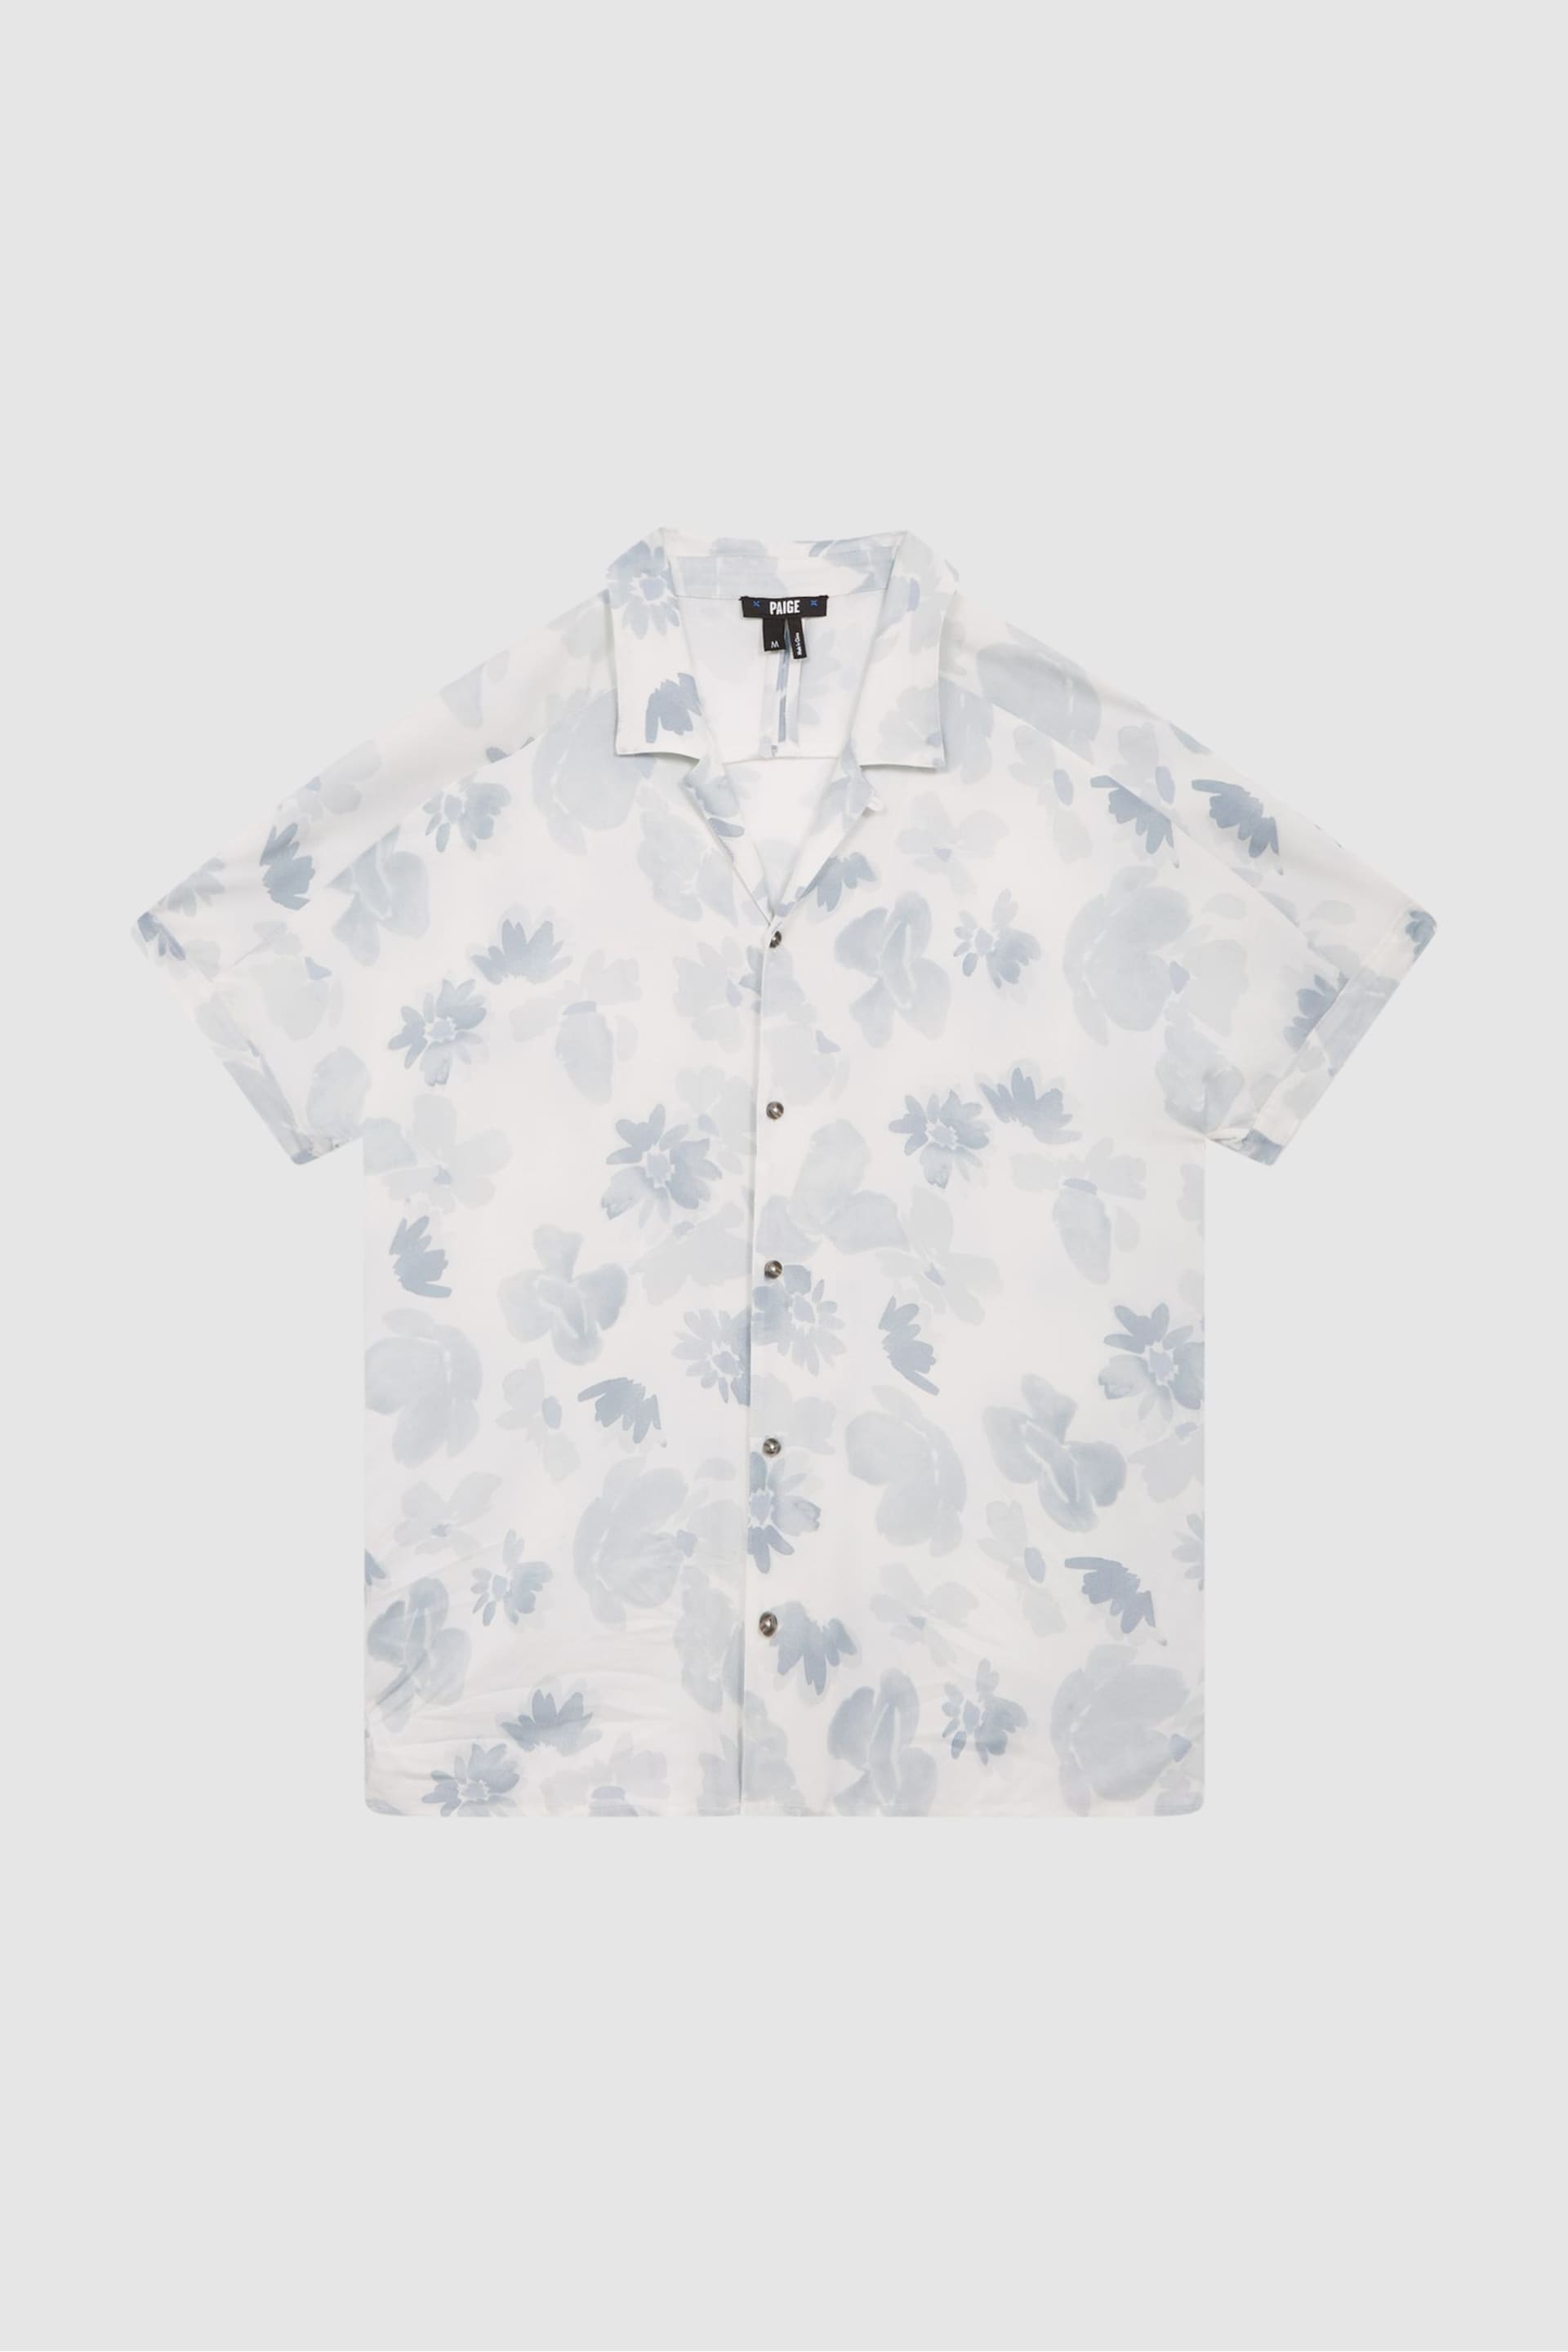 Reiss Light Grey Multi Markell - Paige Paige Floral Shirt - Image 2 of 7